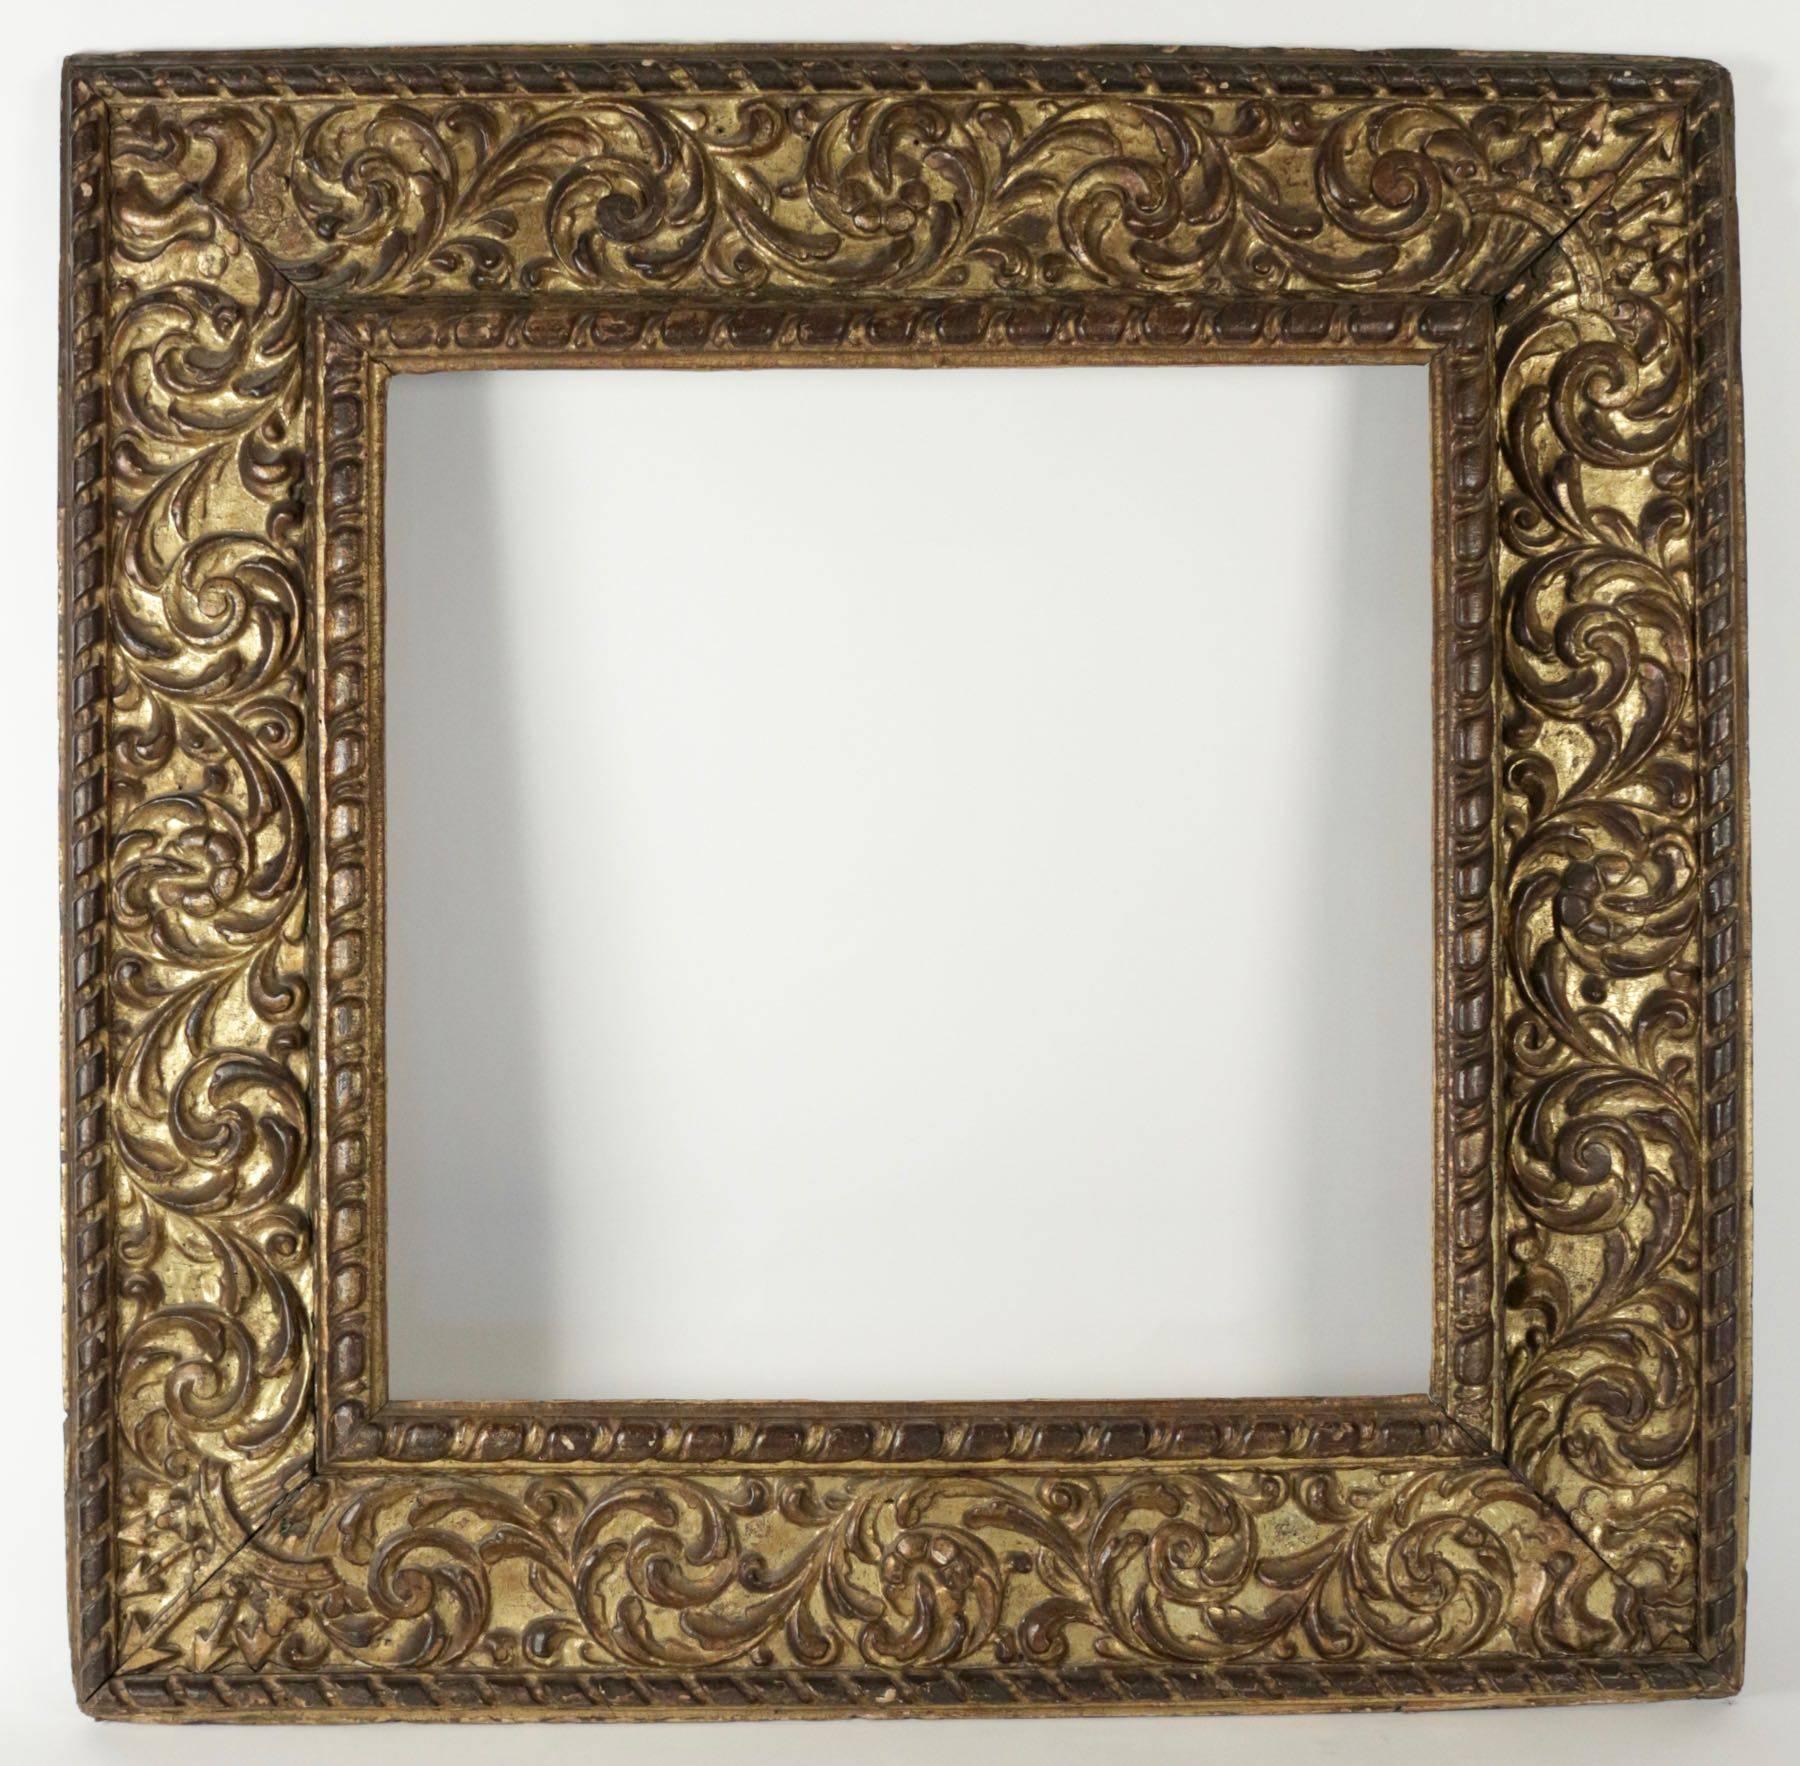 Fabulous Italian frame mounted as mirror, Northern Italy, late 16th century, early 17th century,
carved giltwood,
resized
Sight size as frame is 67 cm x 68 cm.